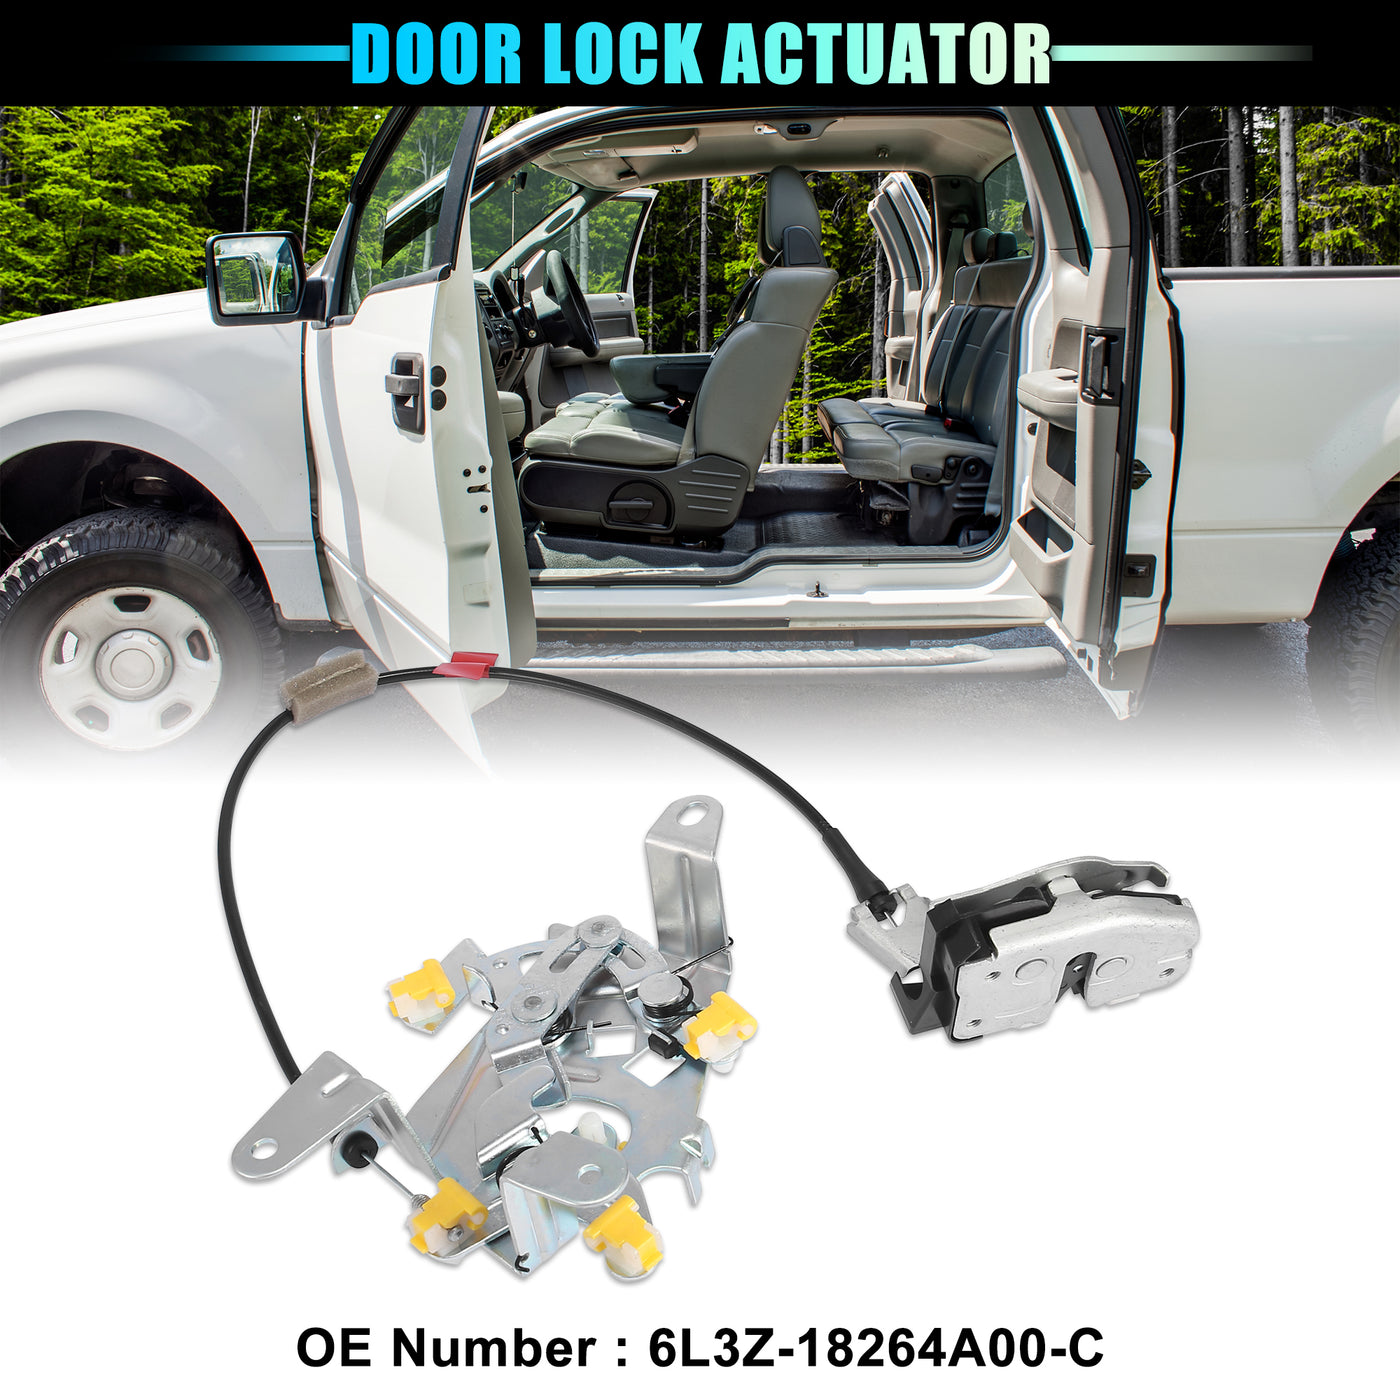 X AUTOHAUX Door Lock Actuator Motor with Cable Rear Right Driver Side for Ford F-150 1997-2003 Extended Cab 6L3Z-18264A00-C